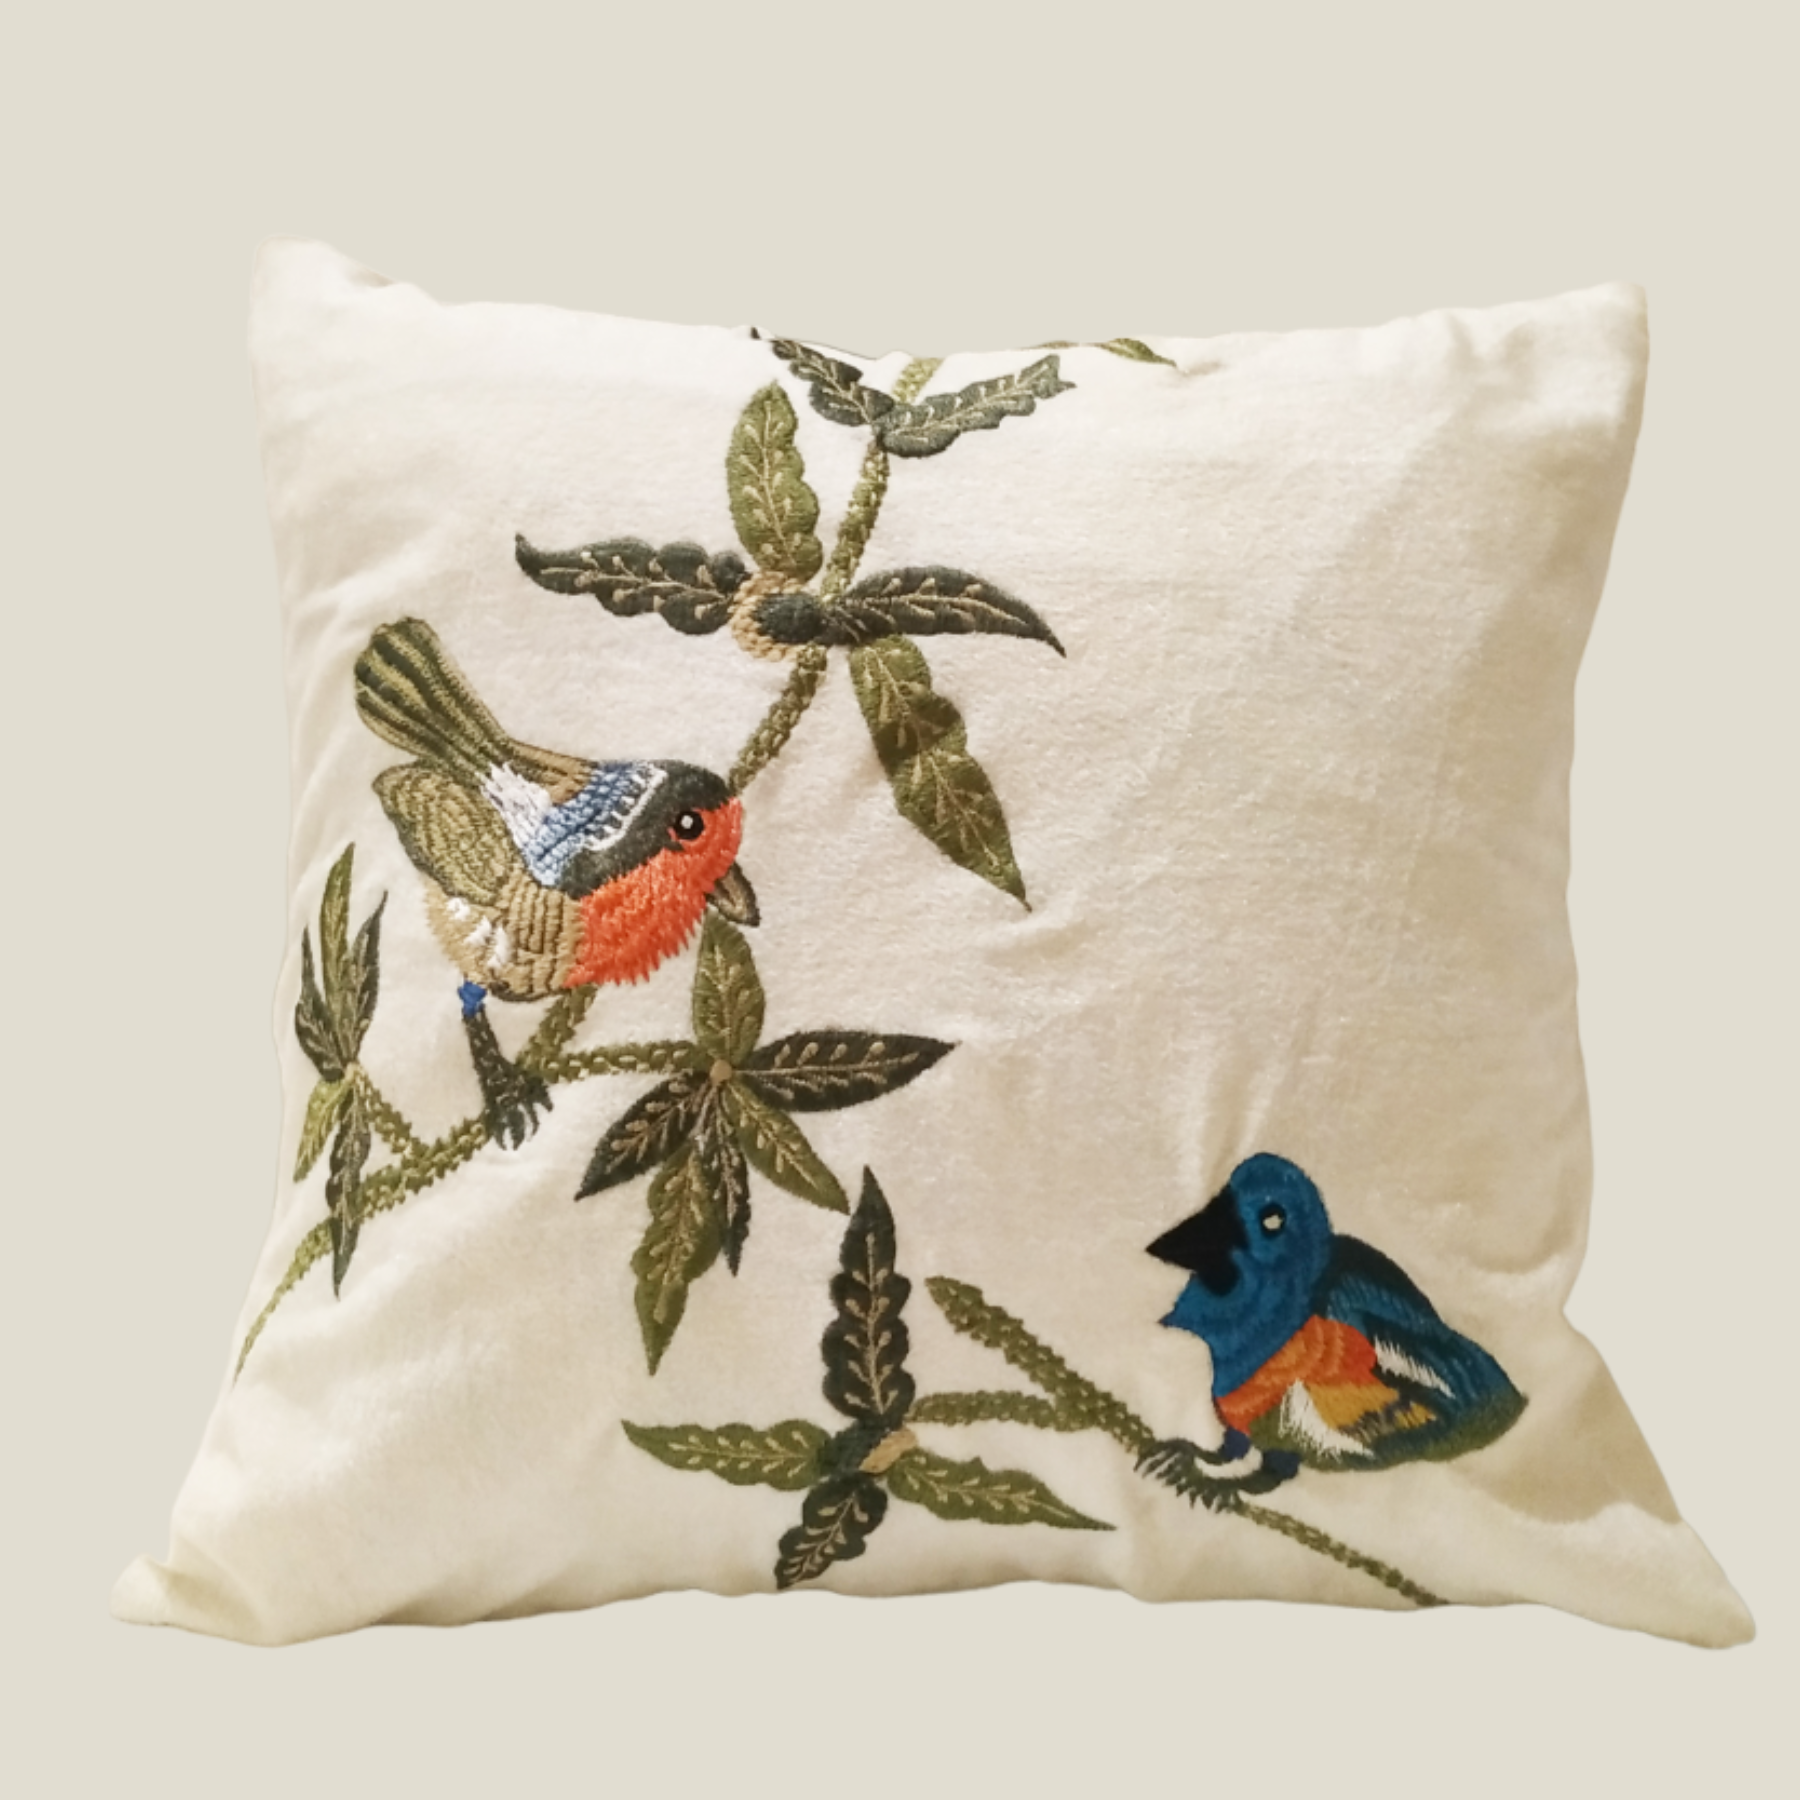 THE LUXELIFE FAUNA EMBROIDERED CUSHION COVER